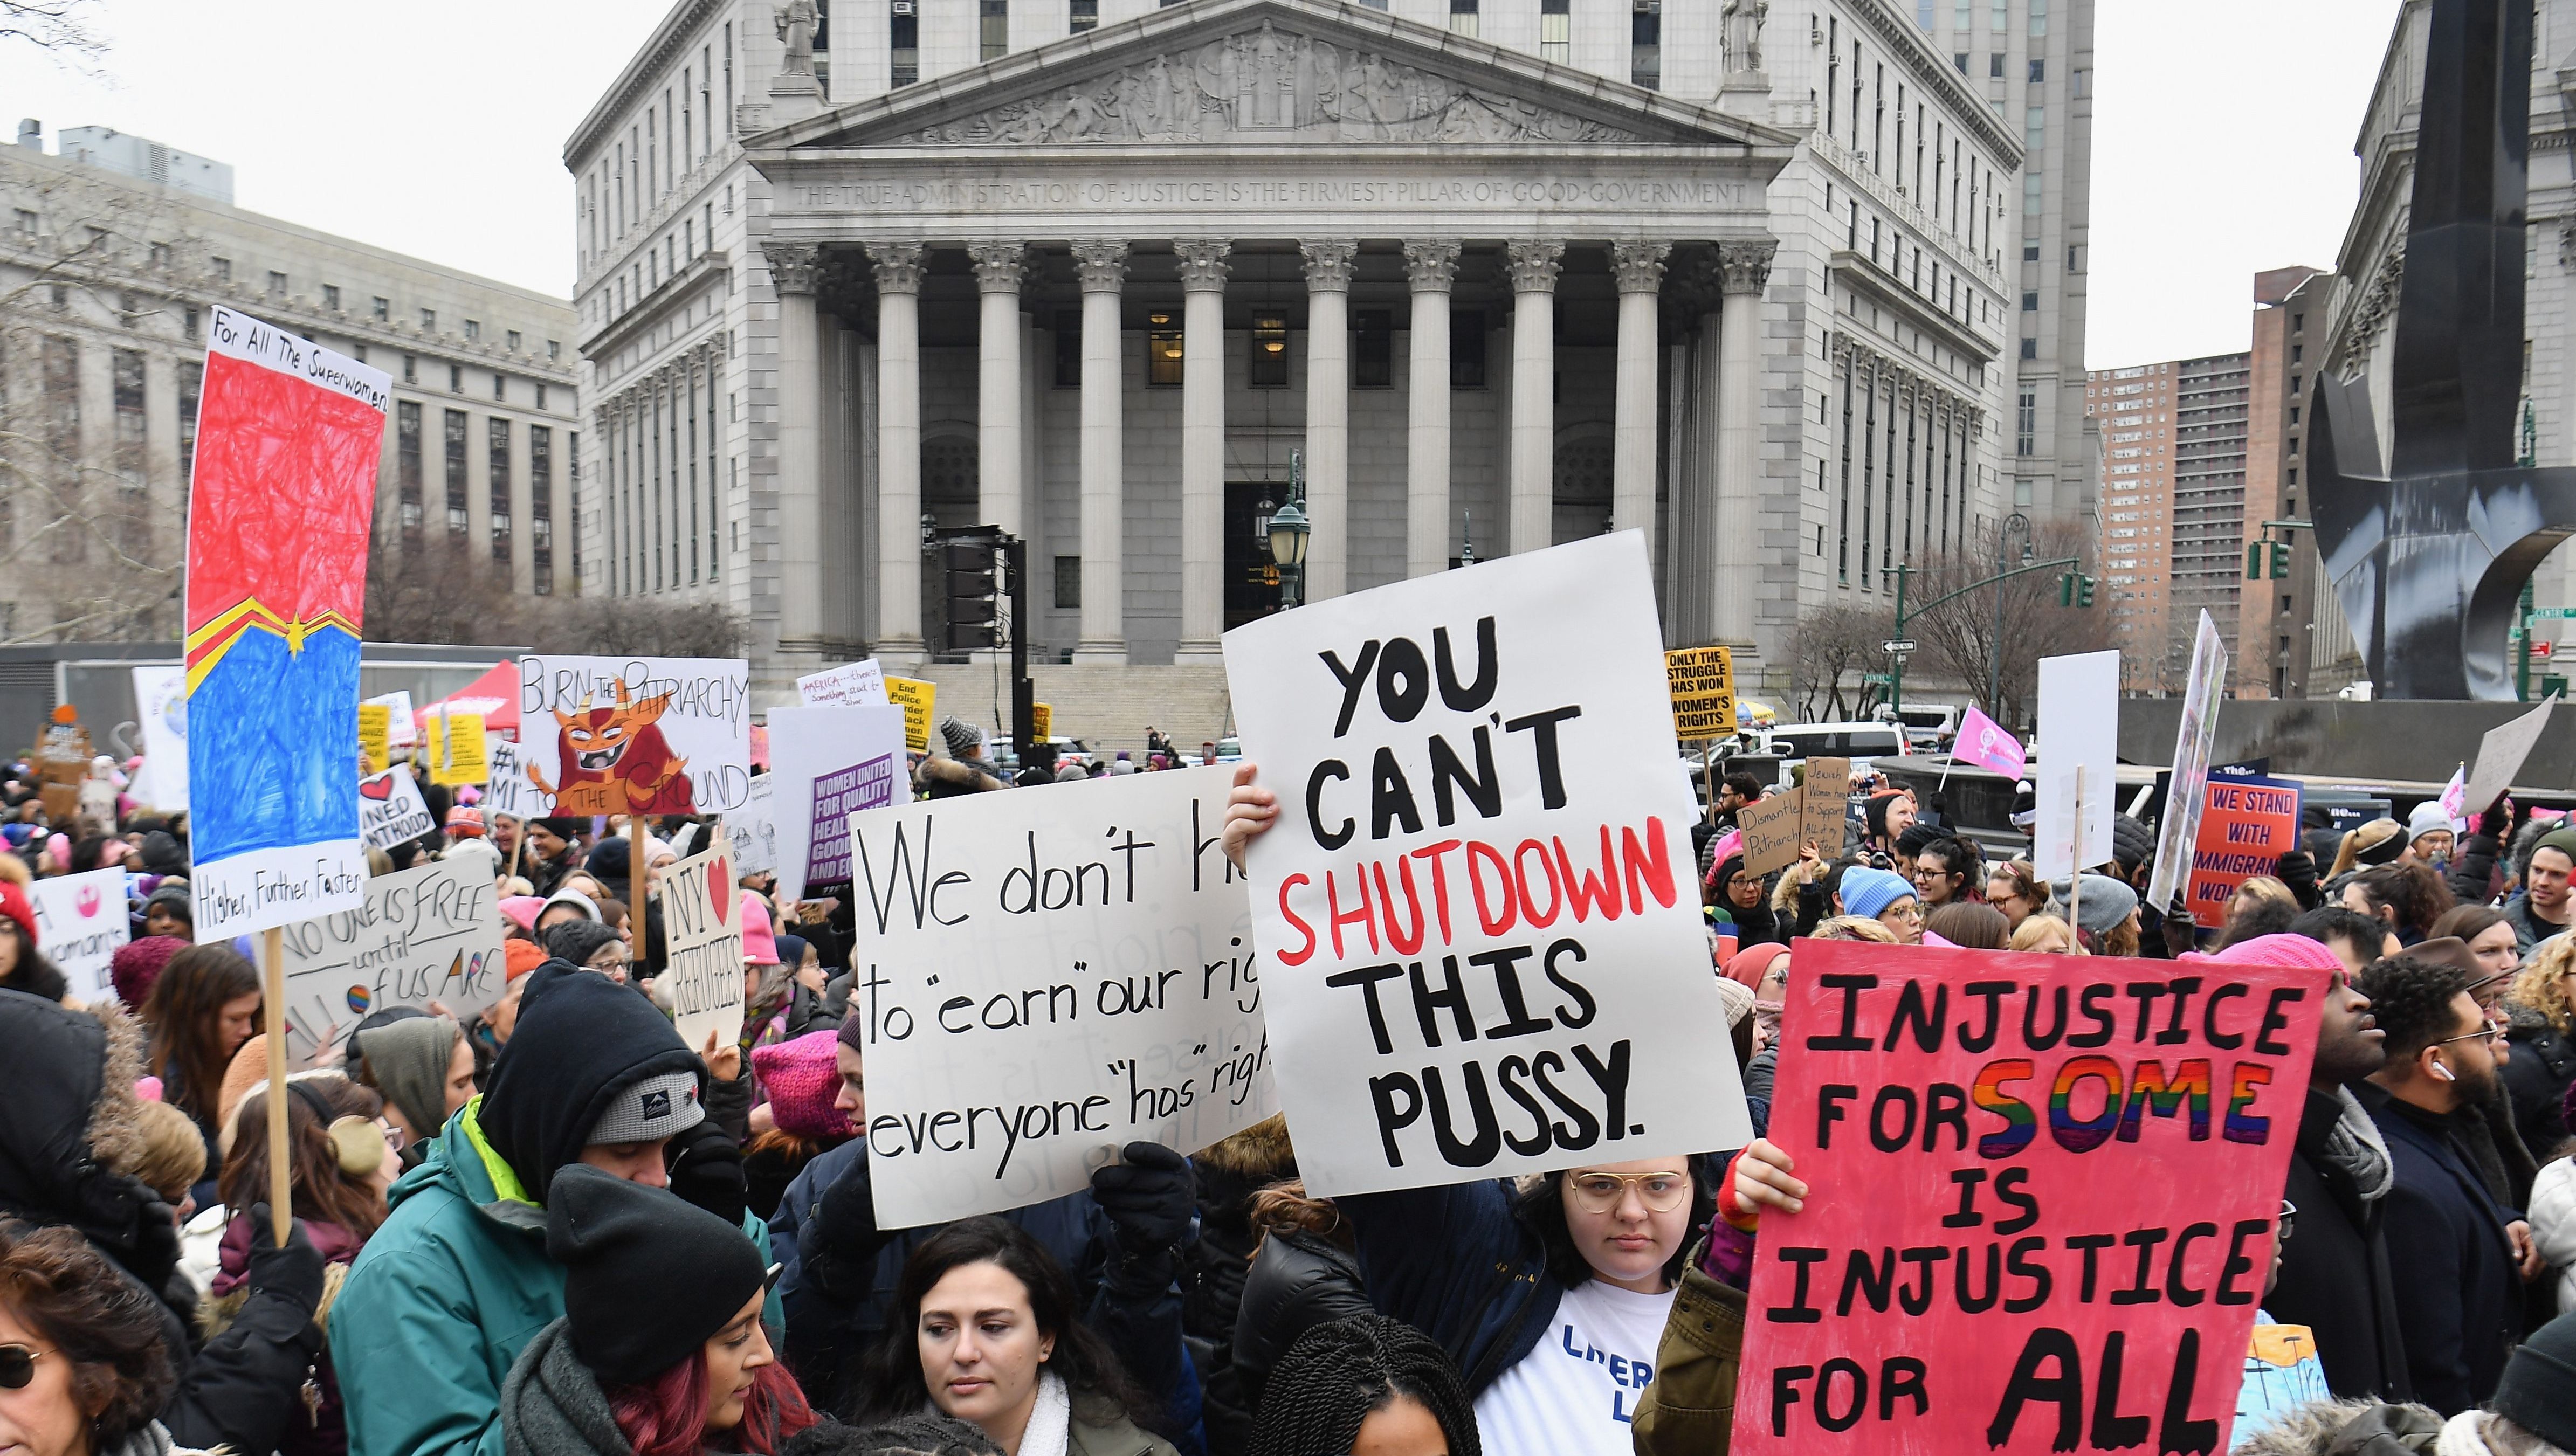 Women’s March NYC vs Women’s March Alliance [PHOTOS]